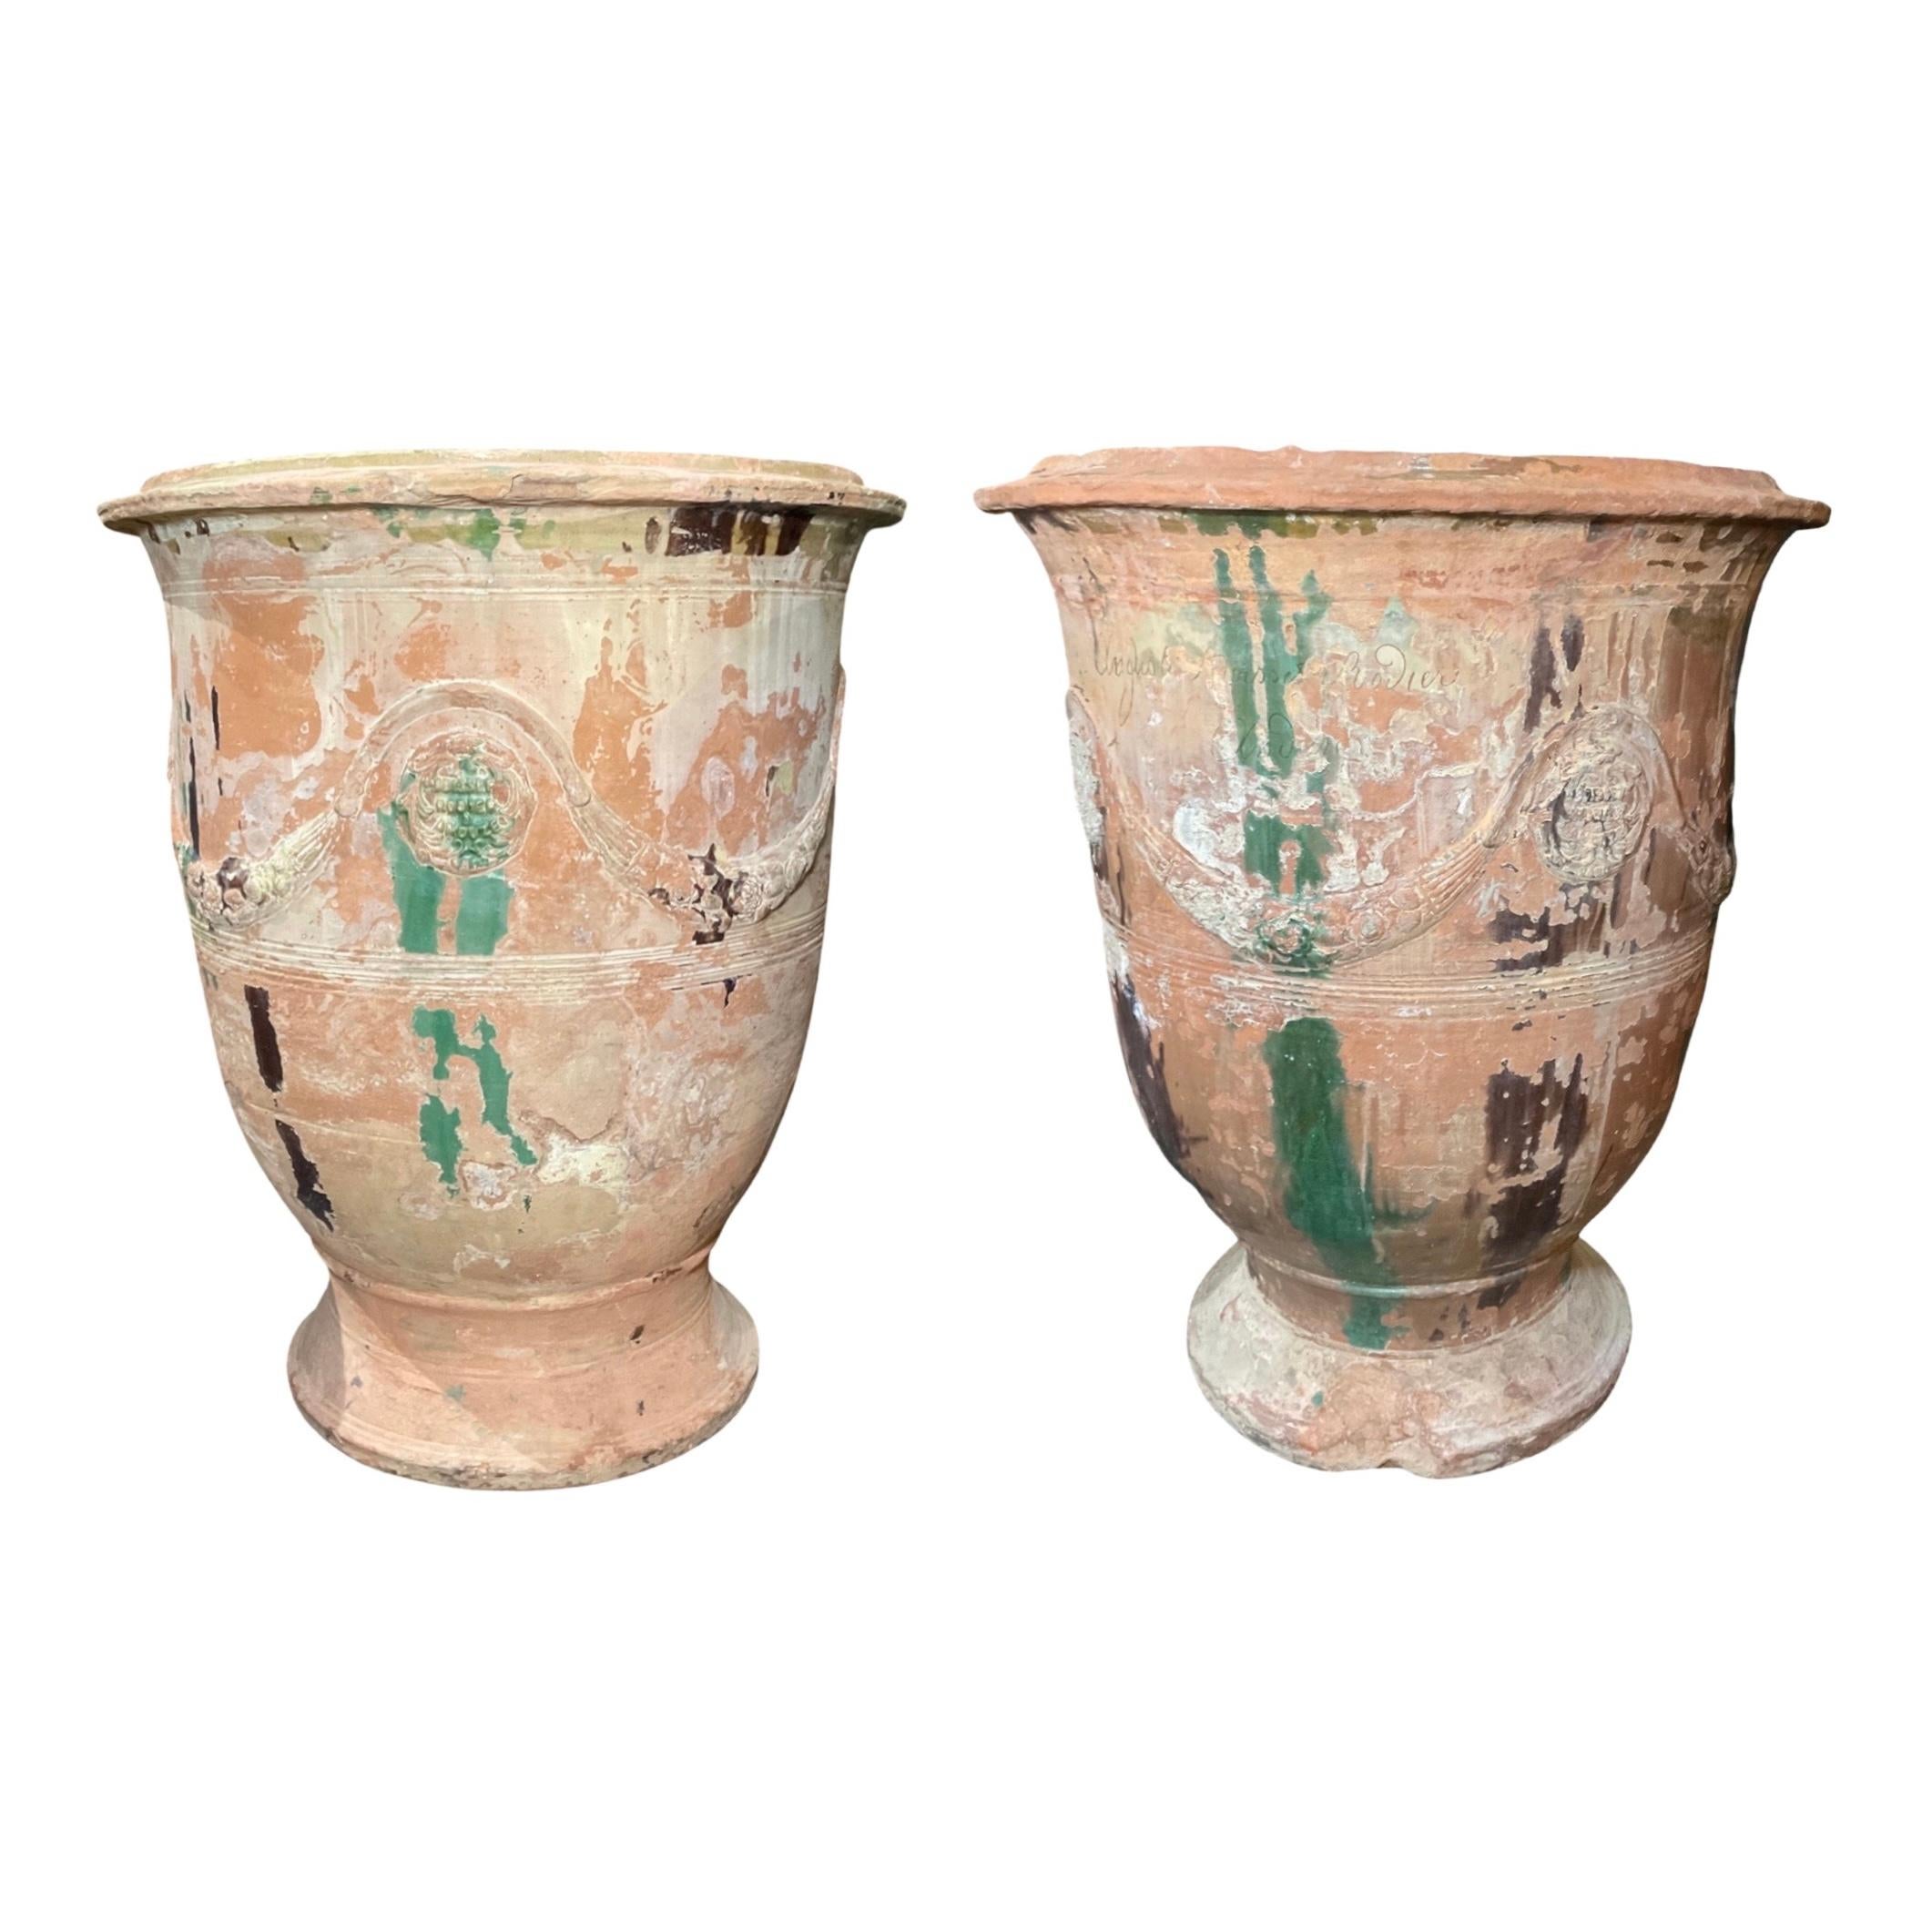 This 19th century pair of large size French-crafted Anduze planters boast a timeless aesthetic, constructed of strong terracotta with a delicate pattern. An ideal way to beautify your garden, these planters offer an elegant touch of classic charm.